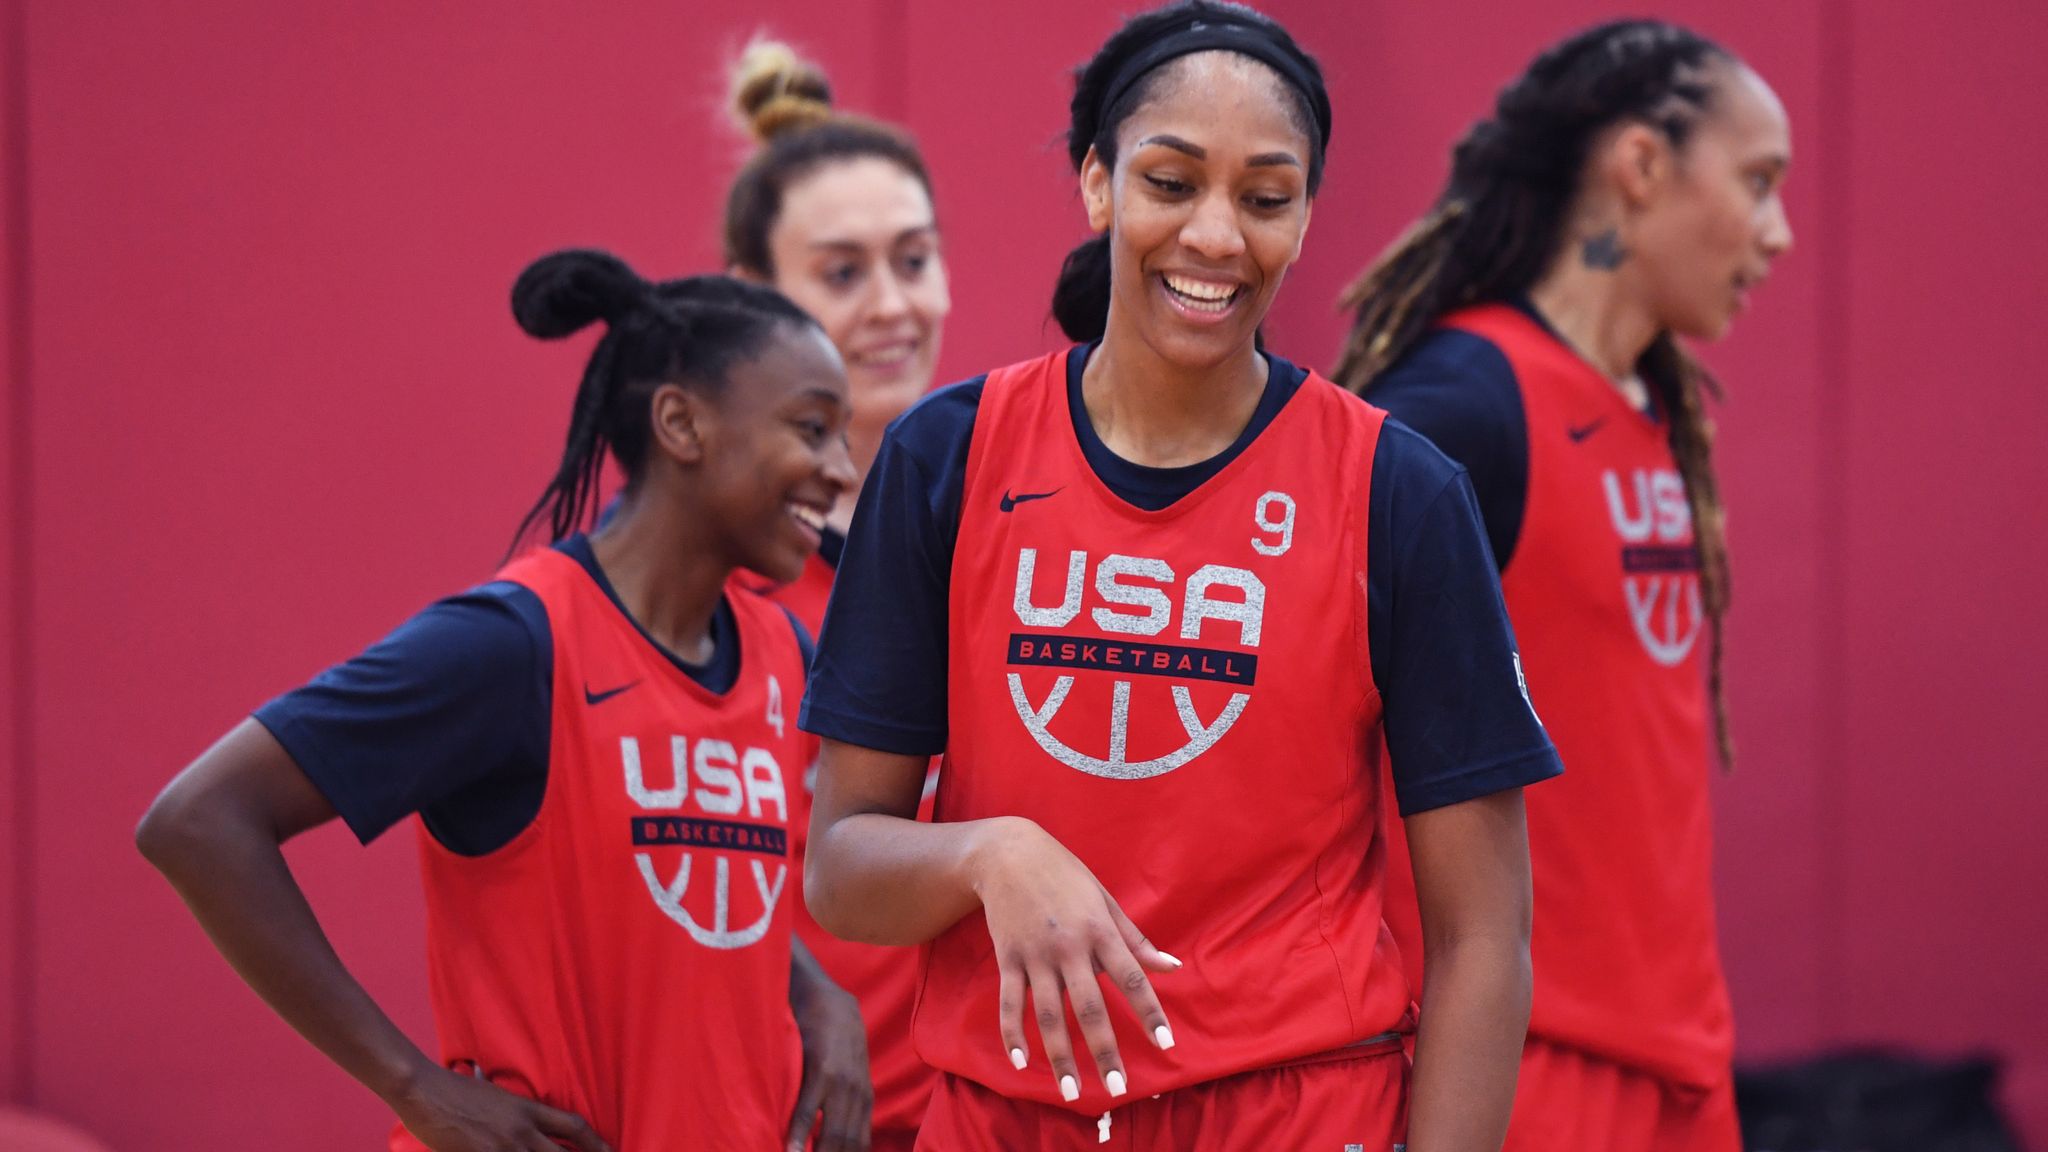 Olympics selection adds heat to WNBA AllStar Game but doesn't diminish